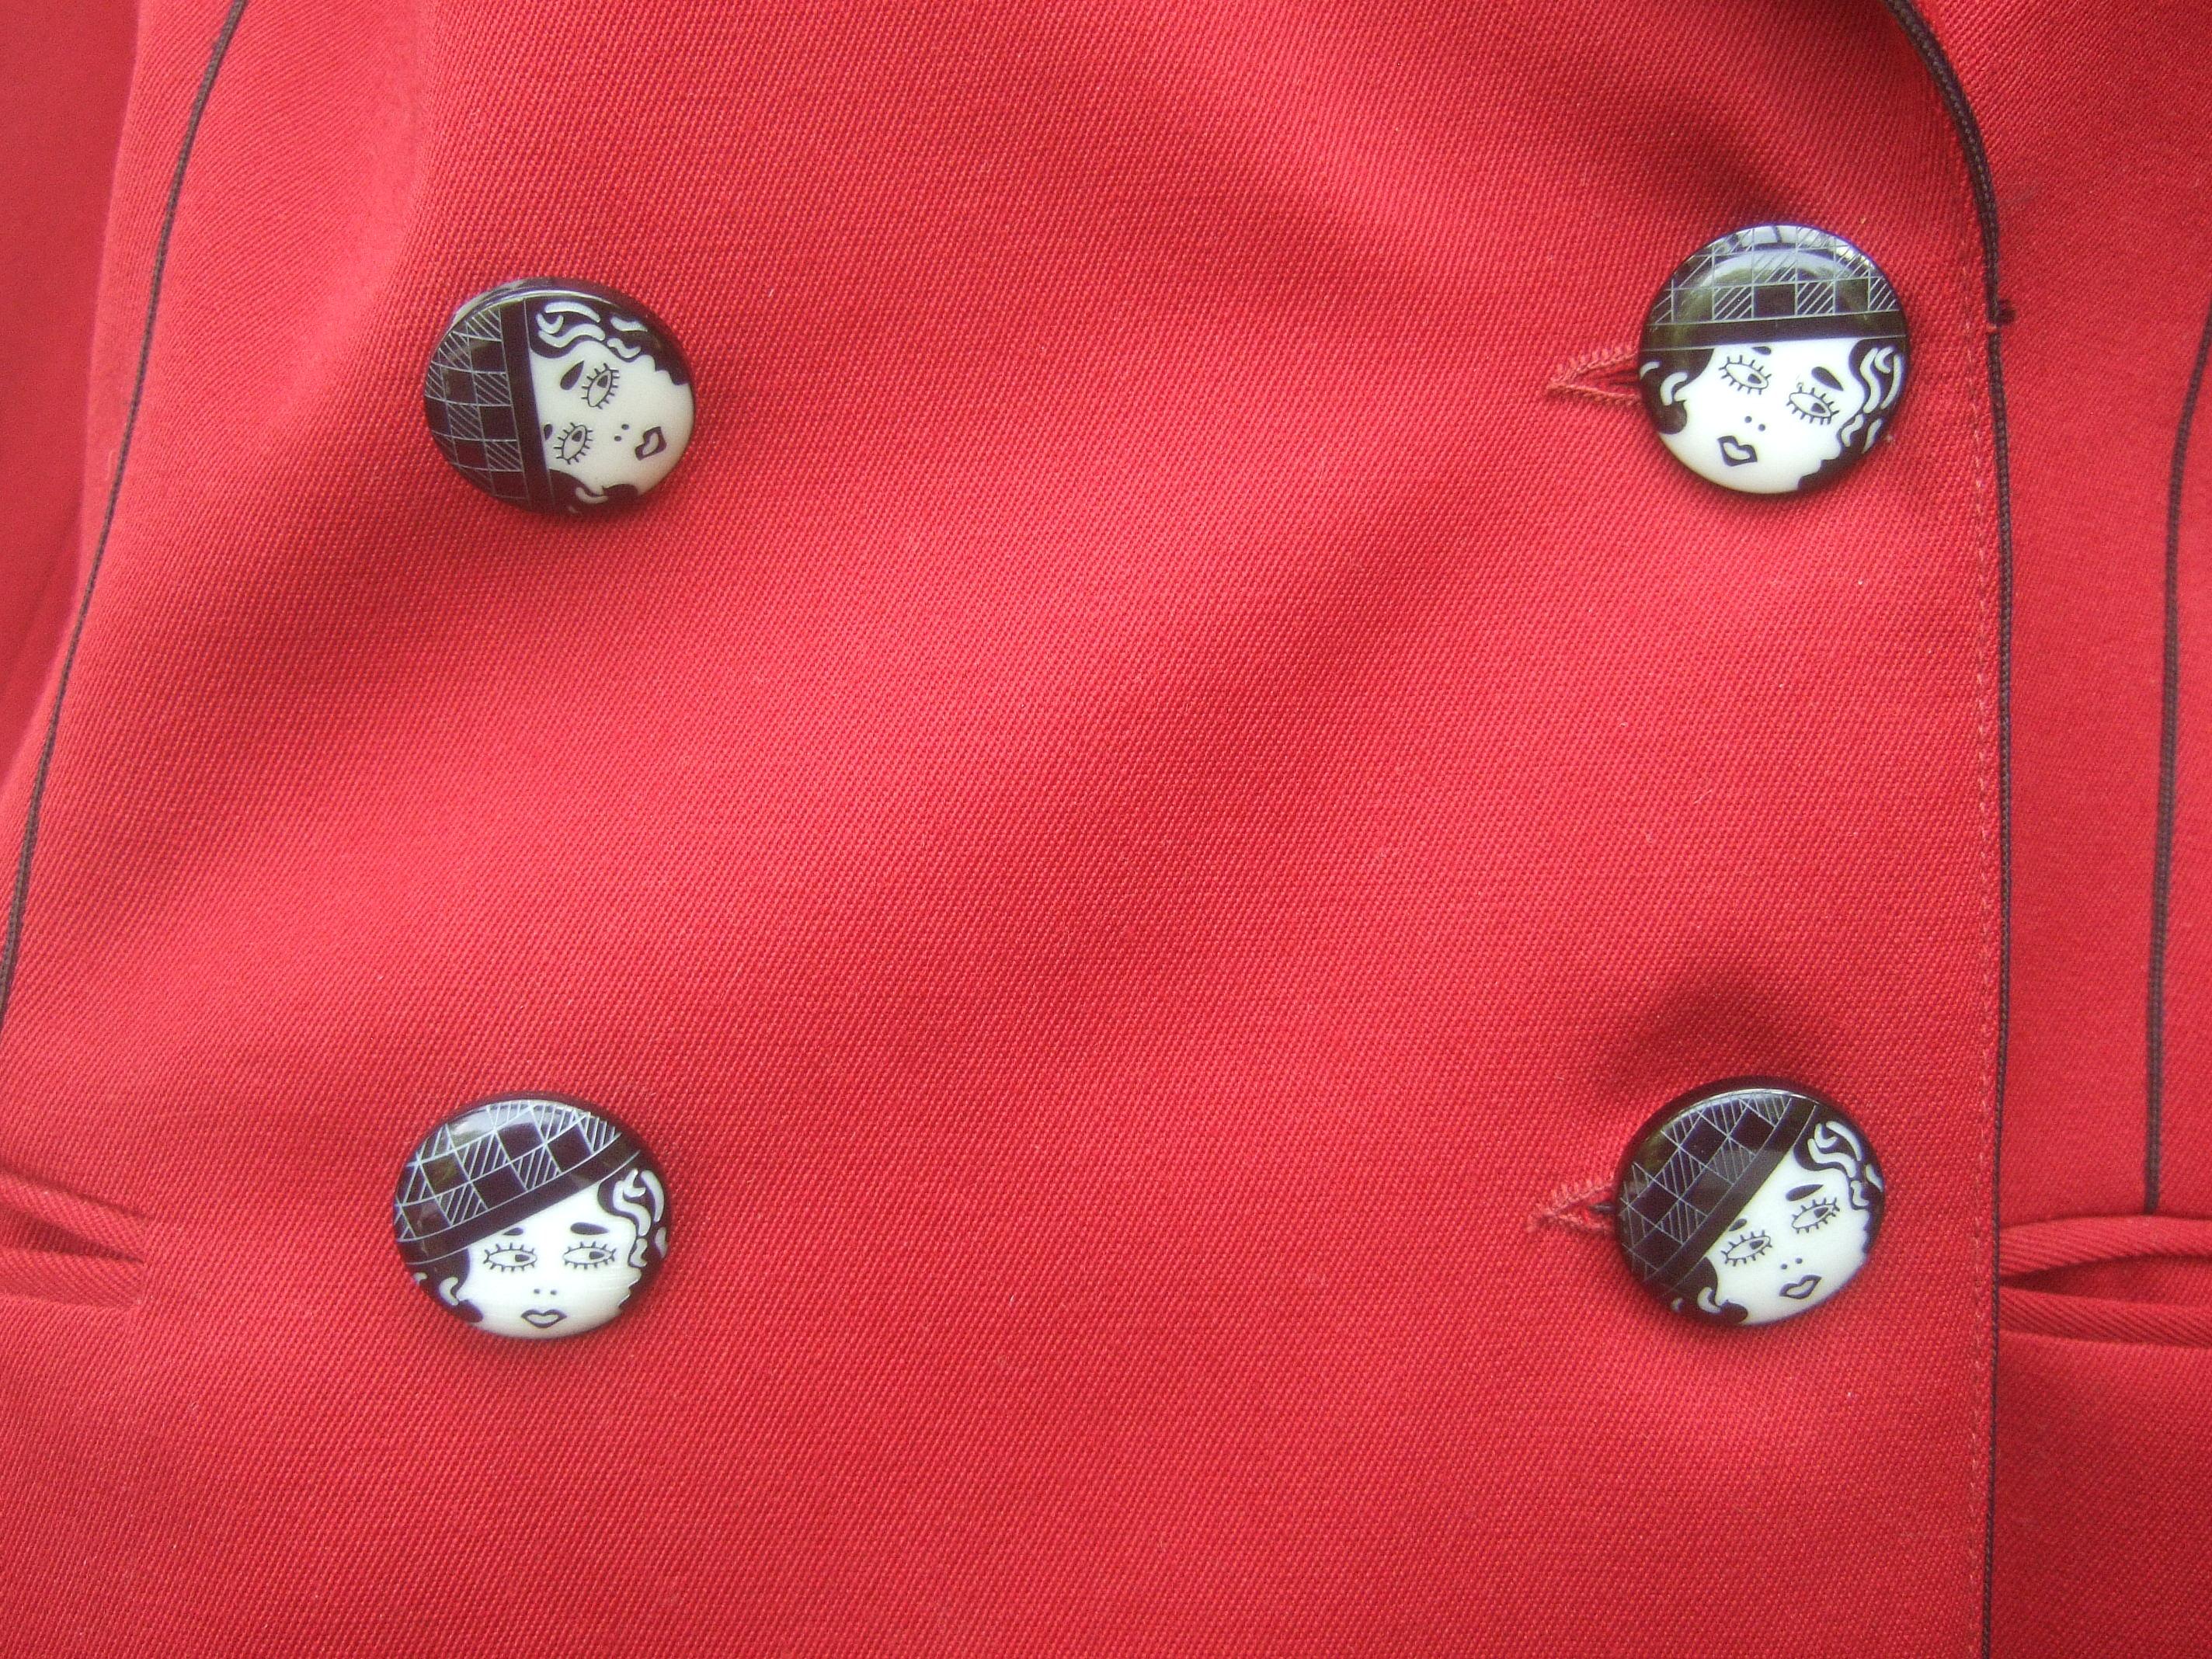 Lolita Lempicka Paris Red Wool Face Button Double-Breasted Blazer c 1980s For Sale 2